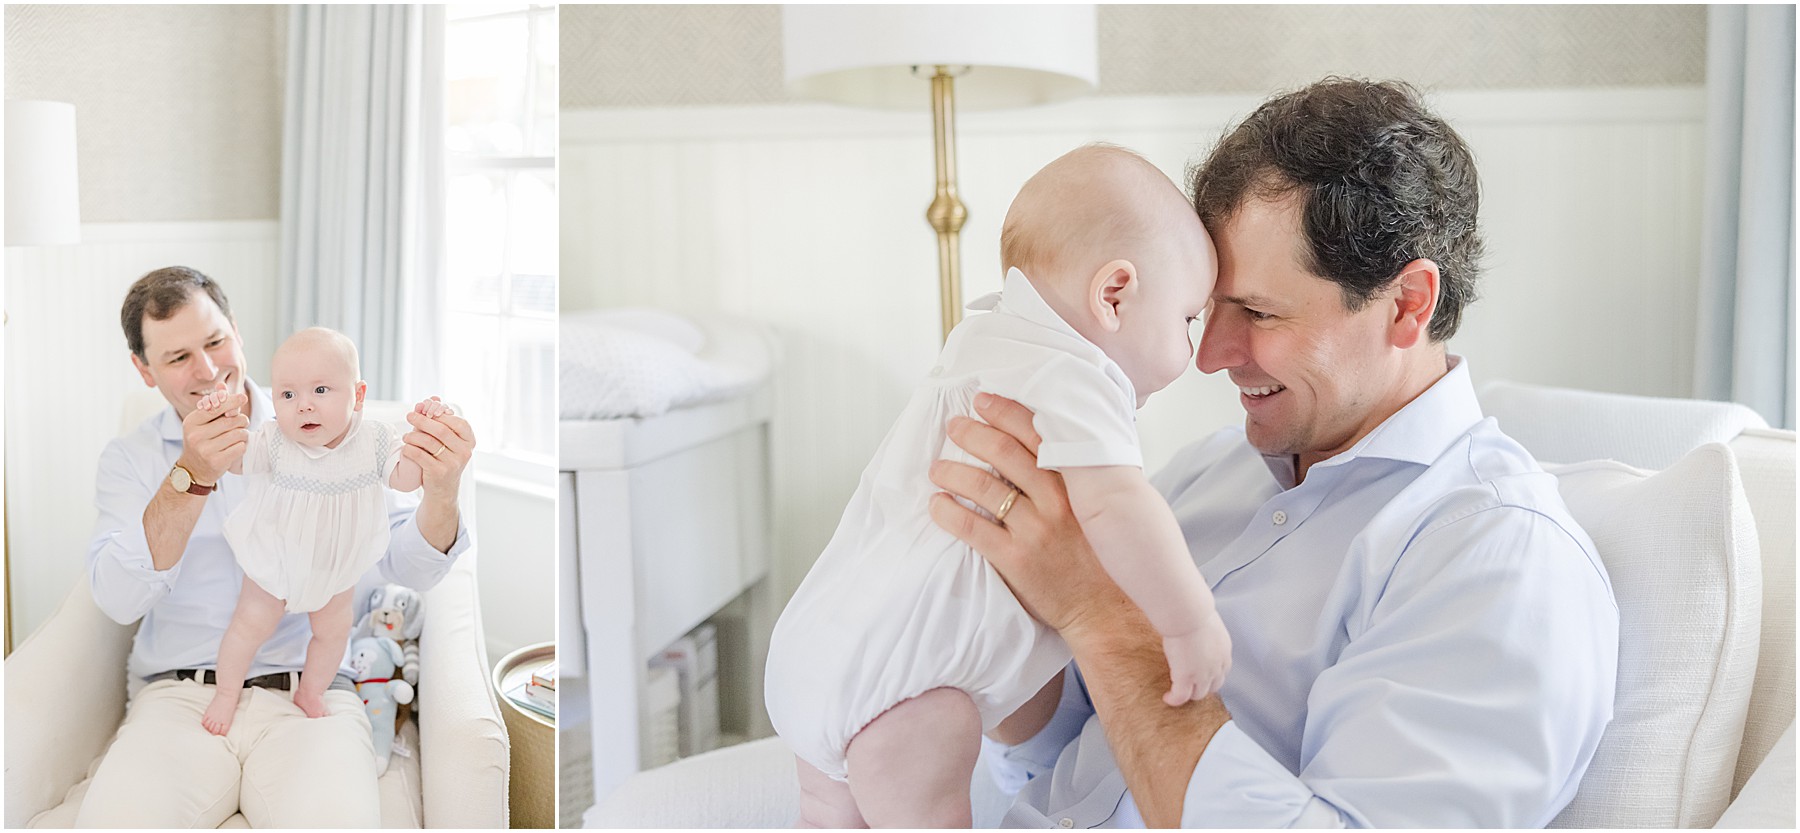 Portraits of a father with his baby